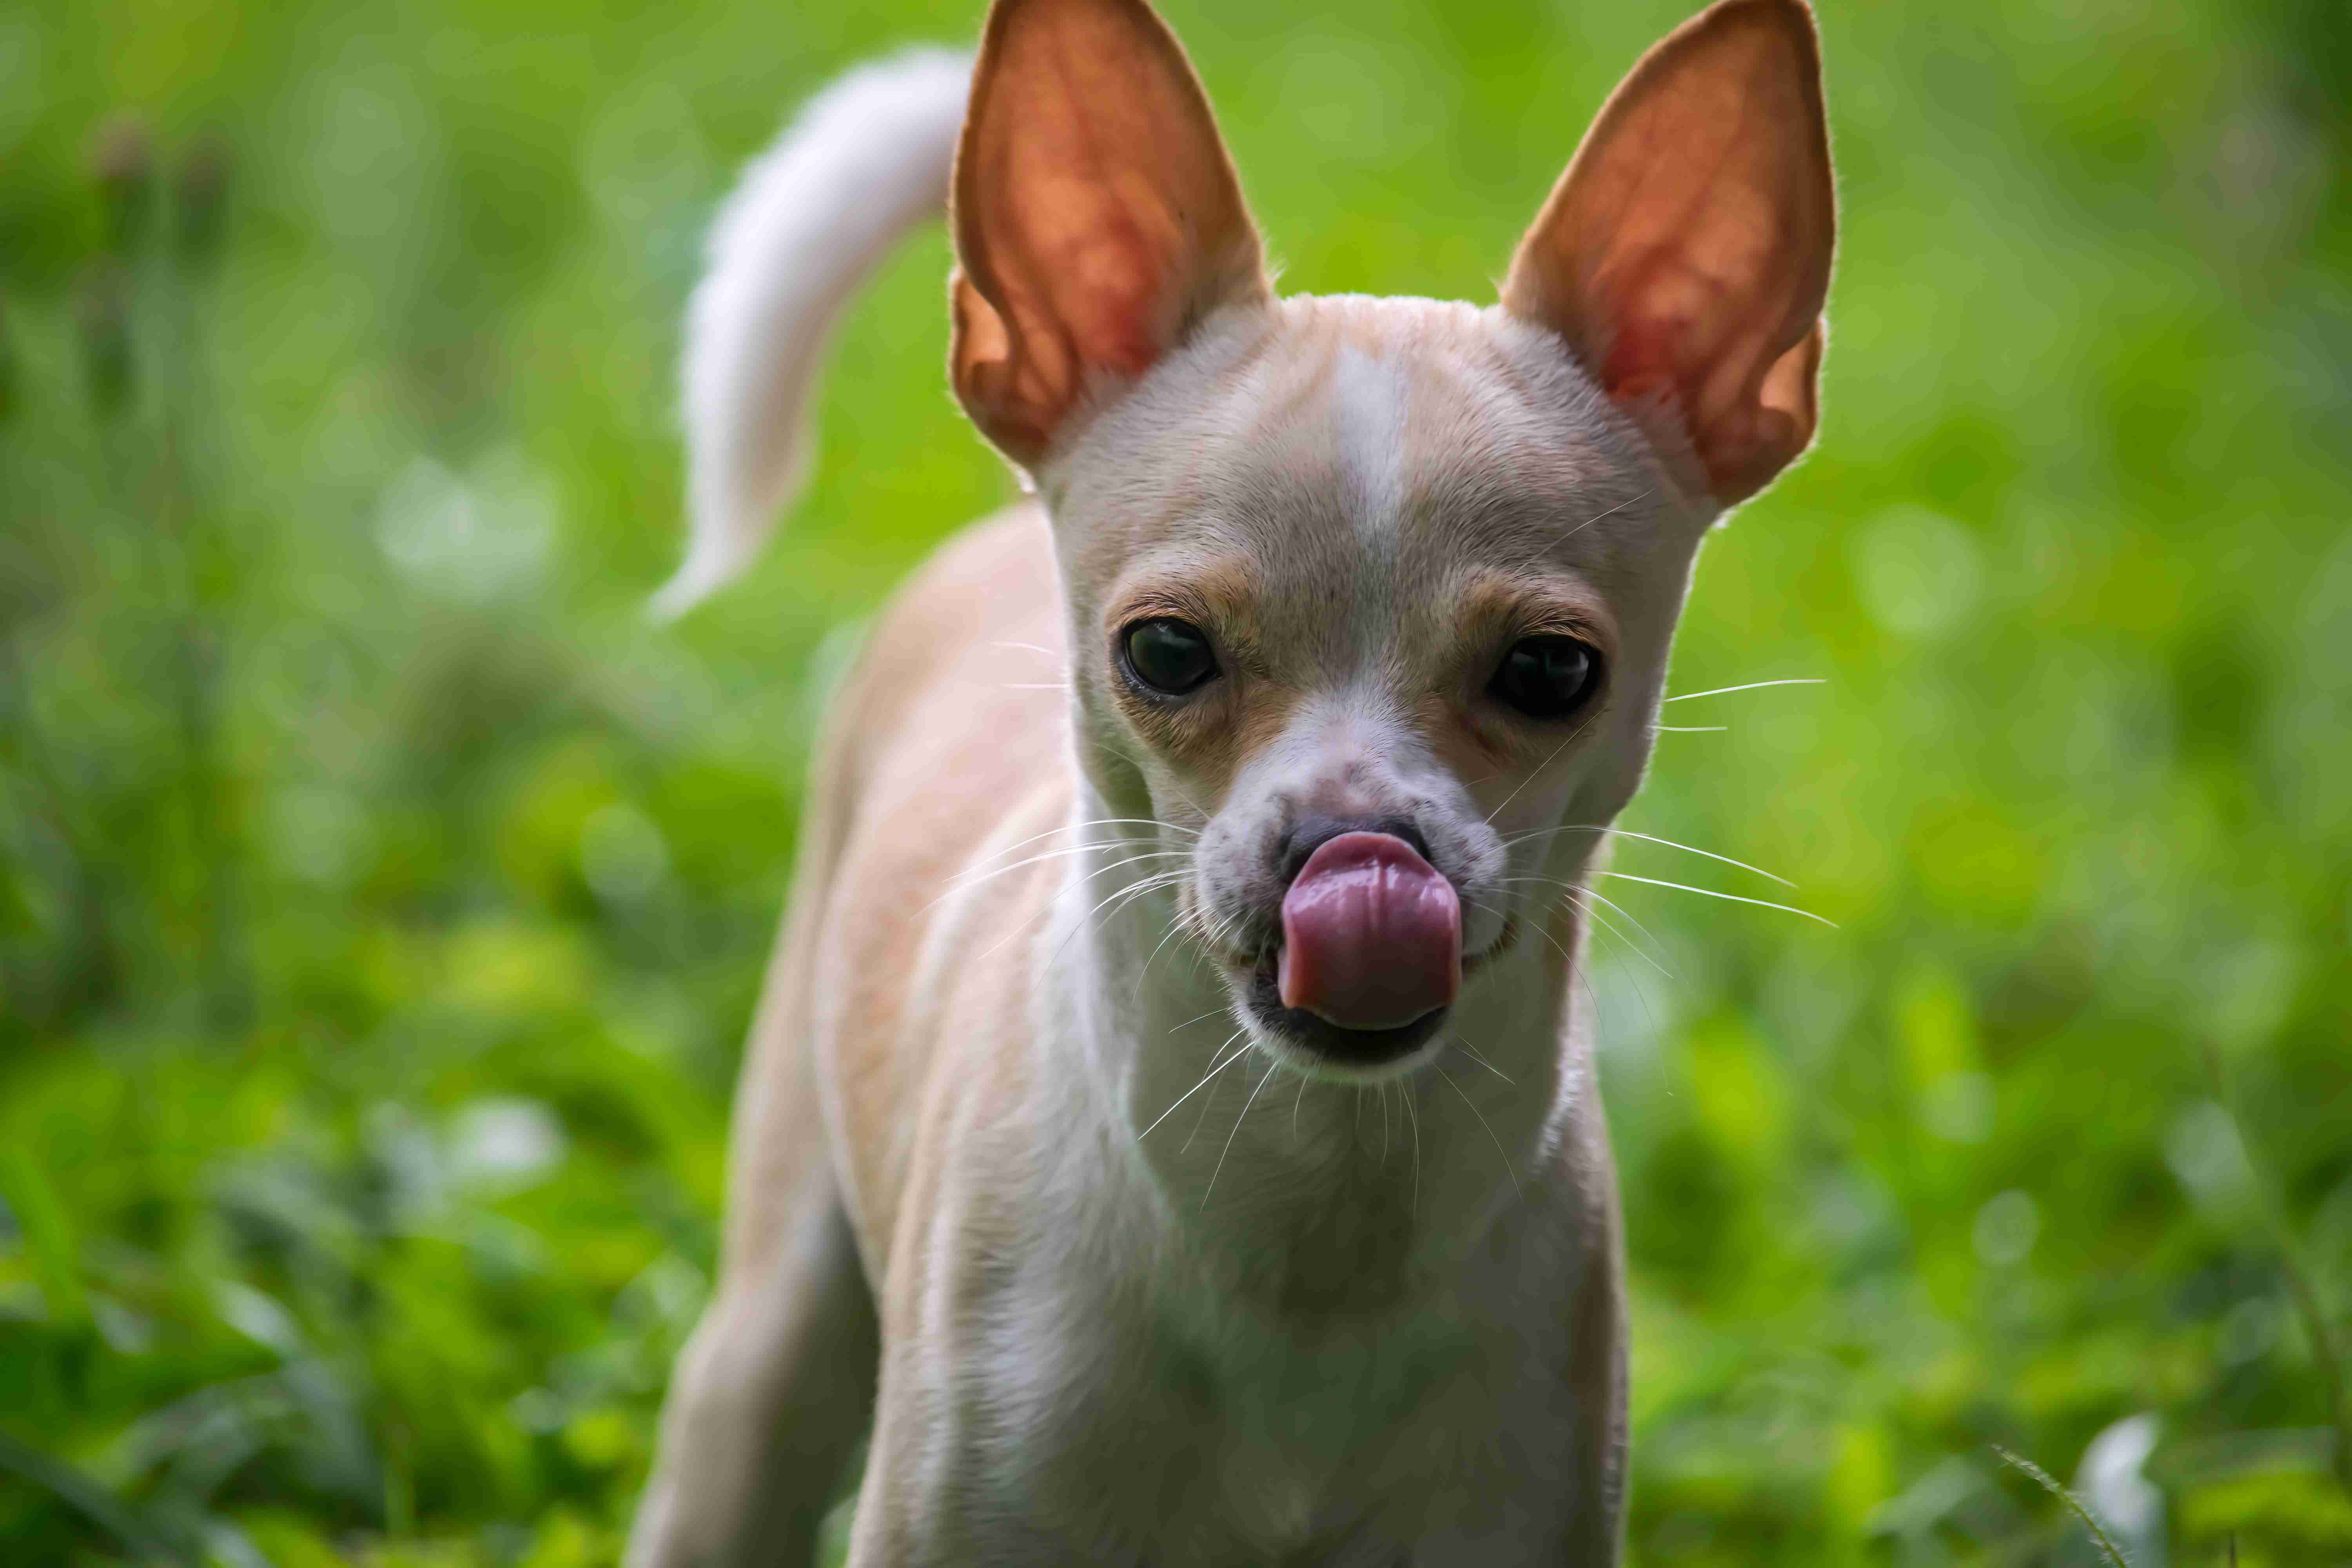 Can a Chihuahua's anger issues be influenced by their sleep patterns or lack of quality rest?